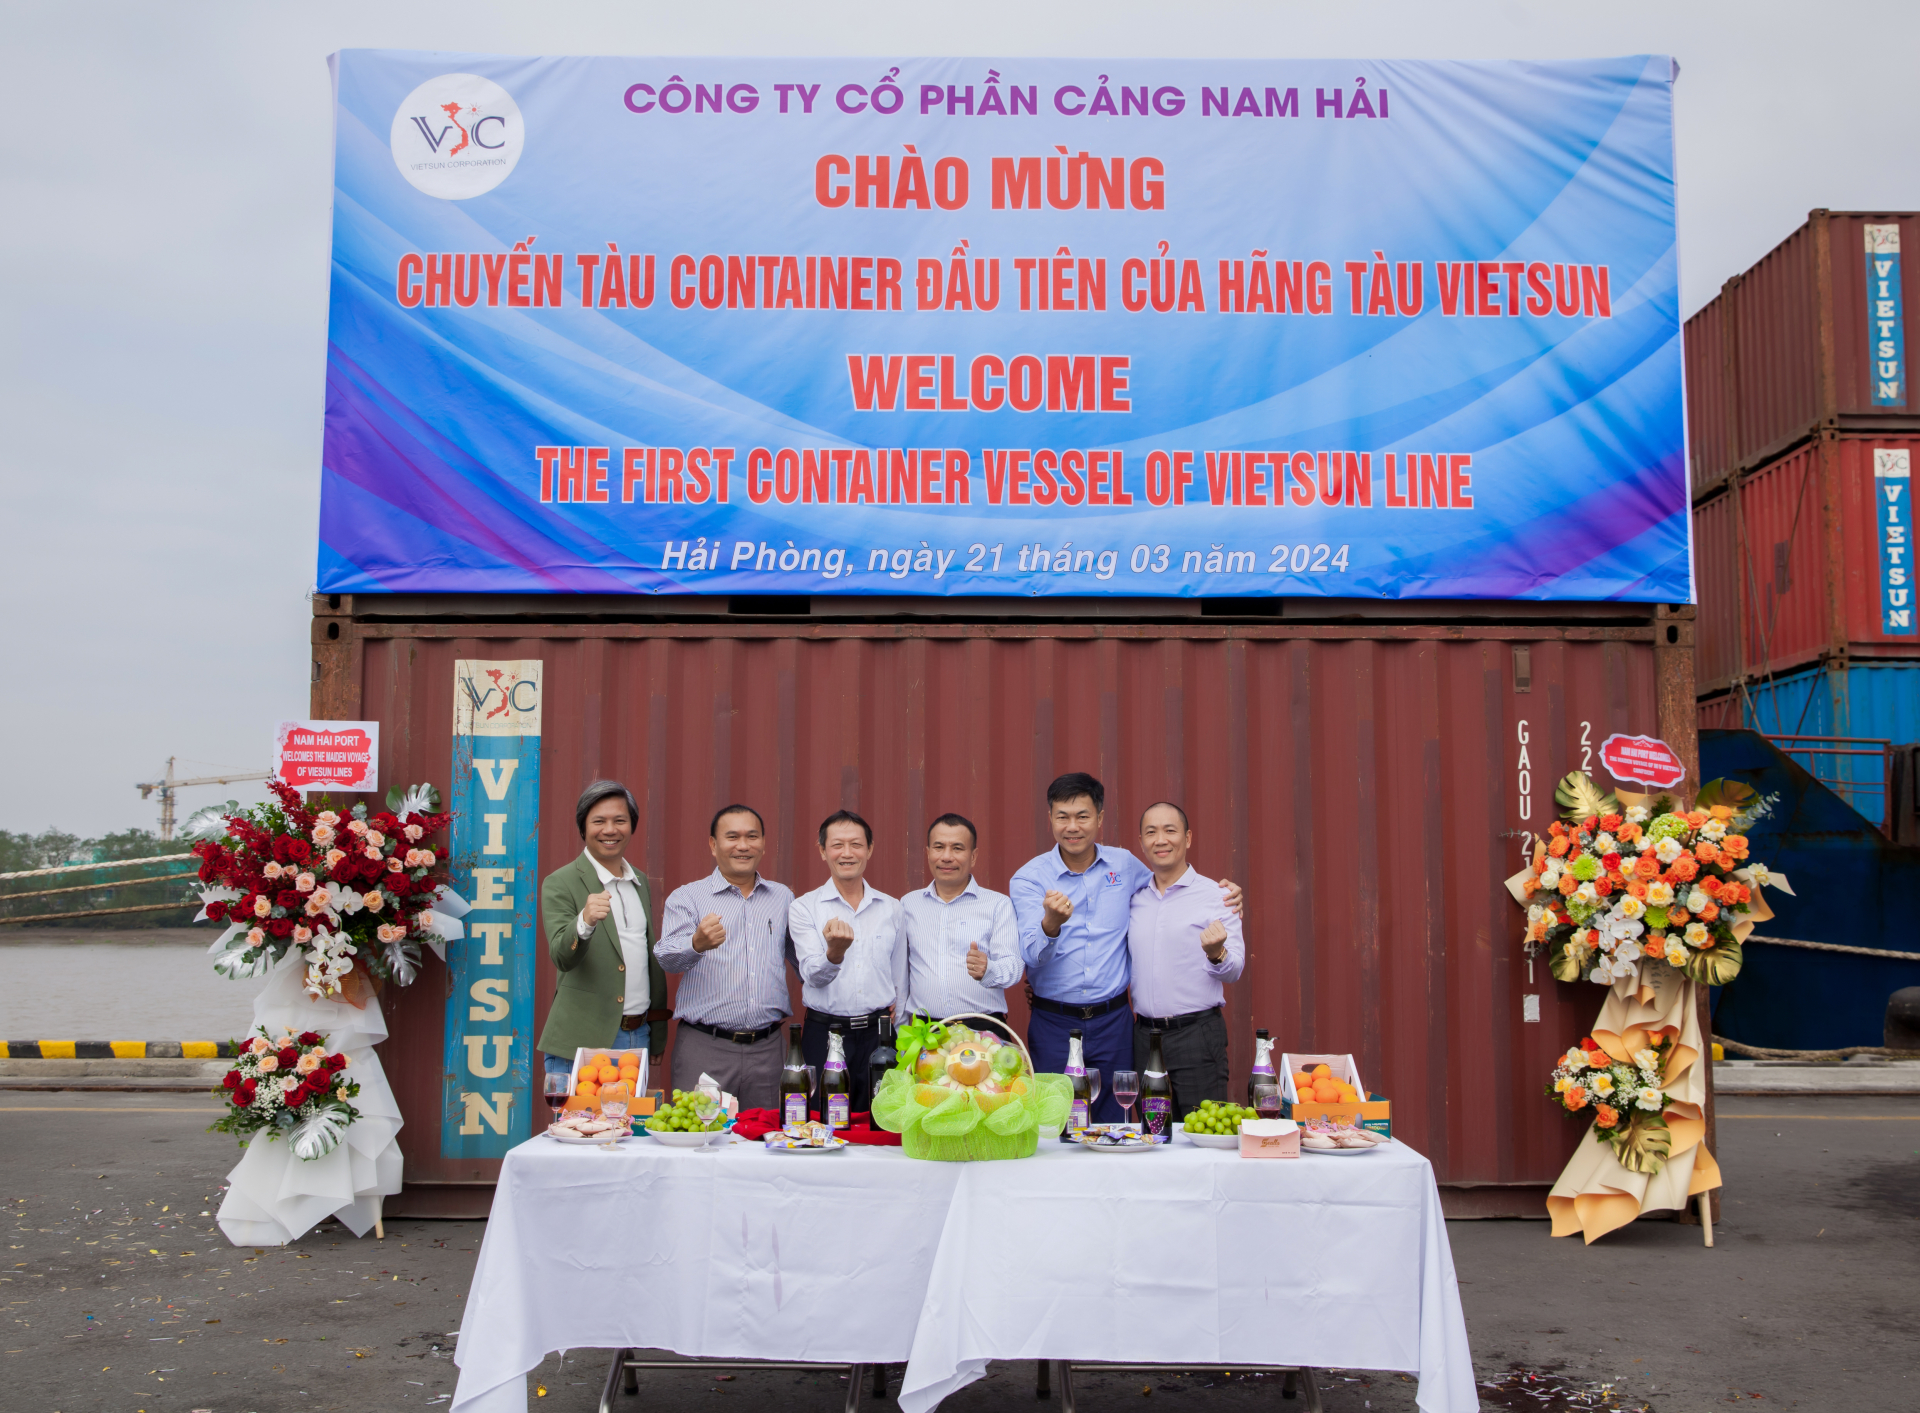 Welcome the first container vessel of Vietsun line